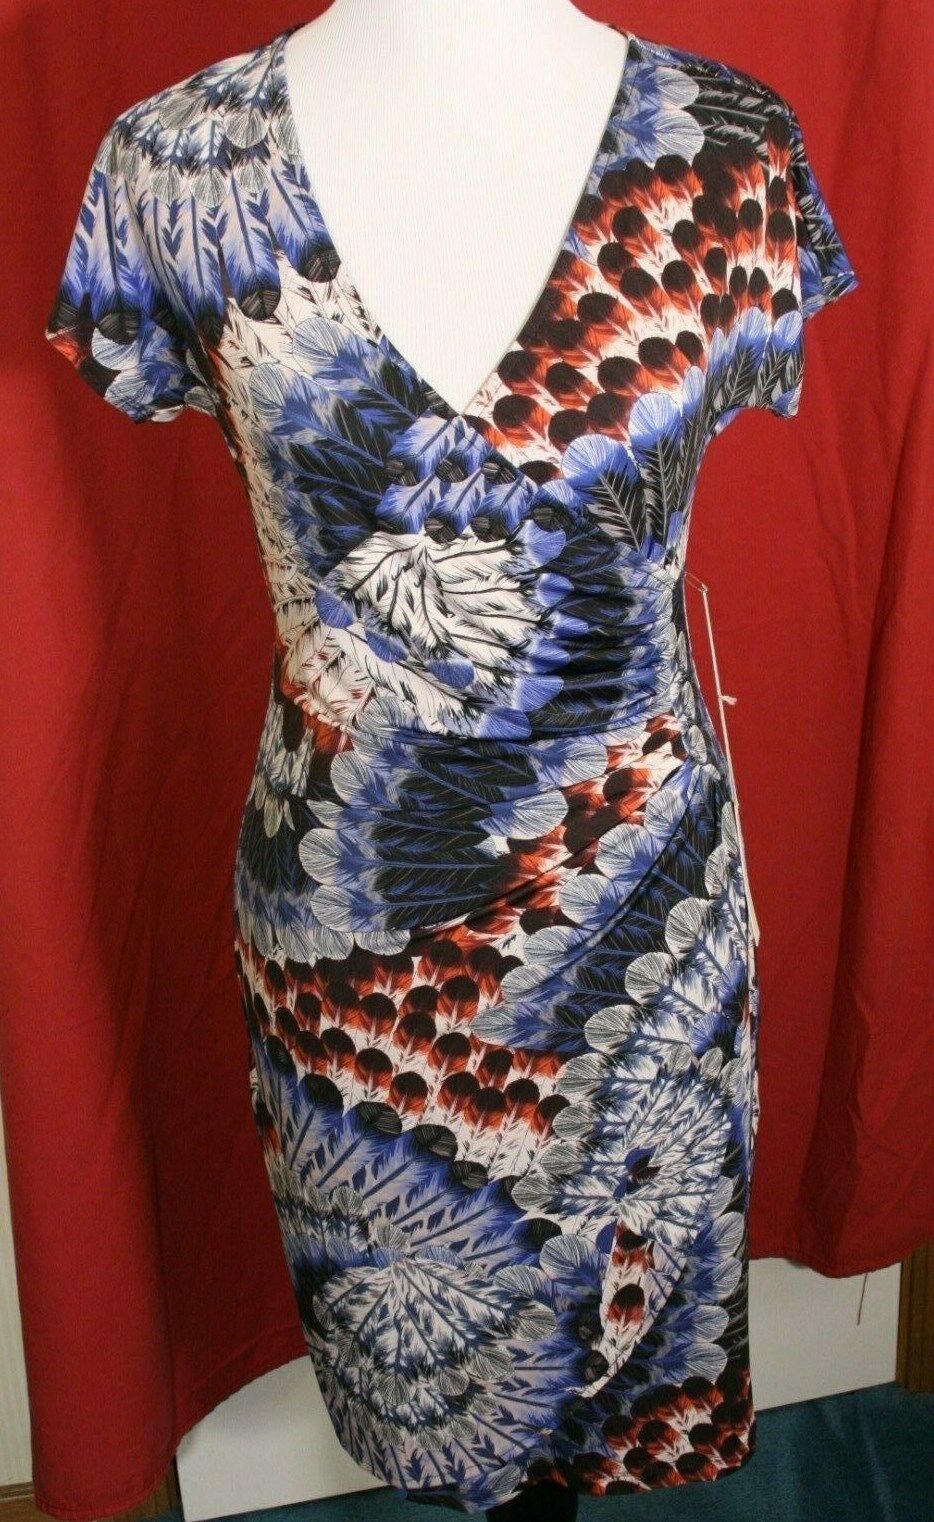 Primary image for Presley Skye NWT Feathered Ruched XS Women's Dress Cap Sleeve $119 Easy Care